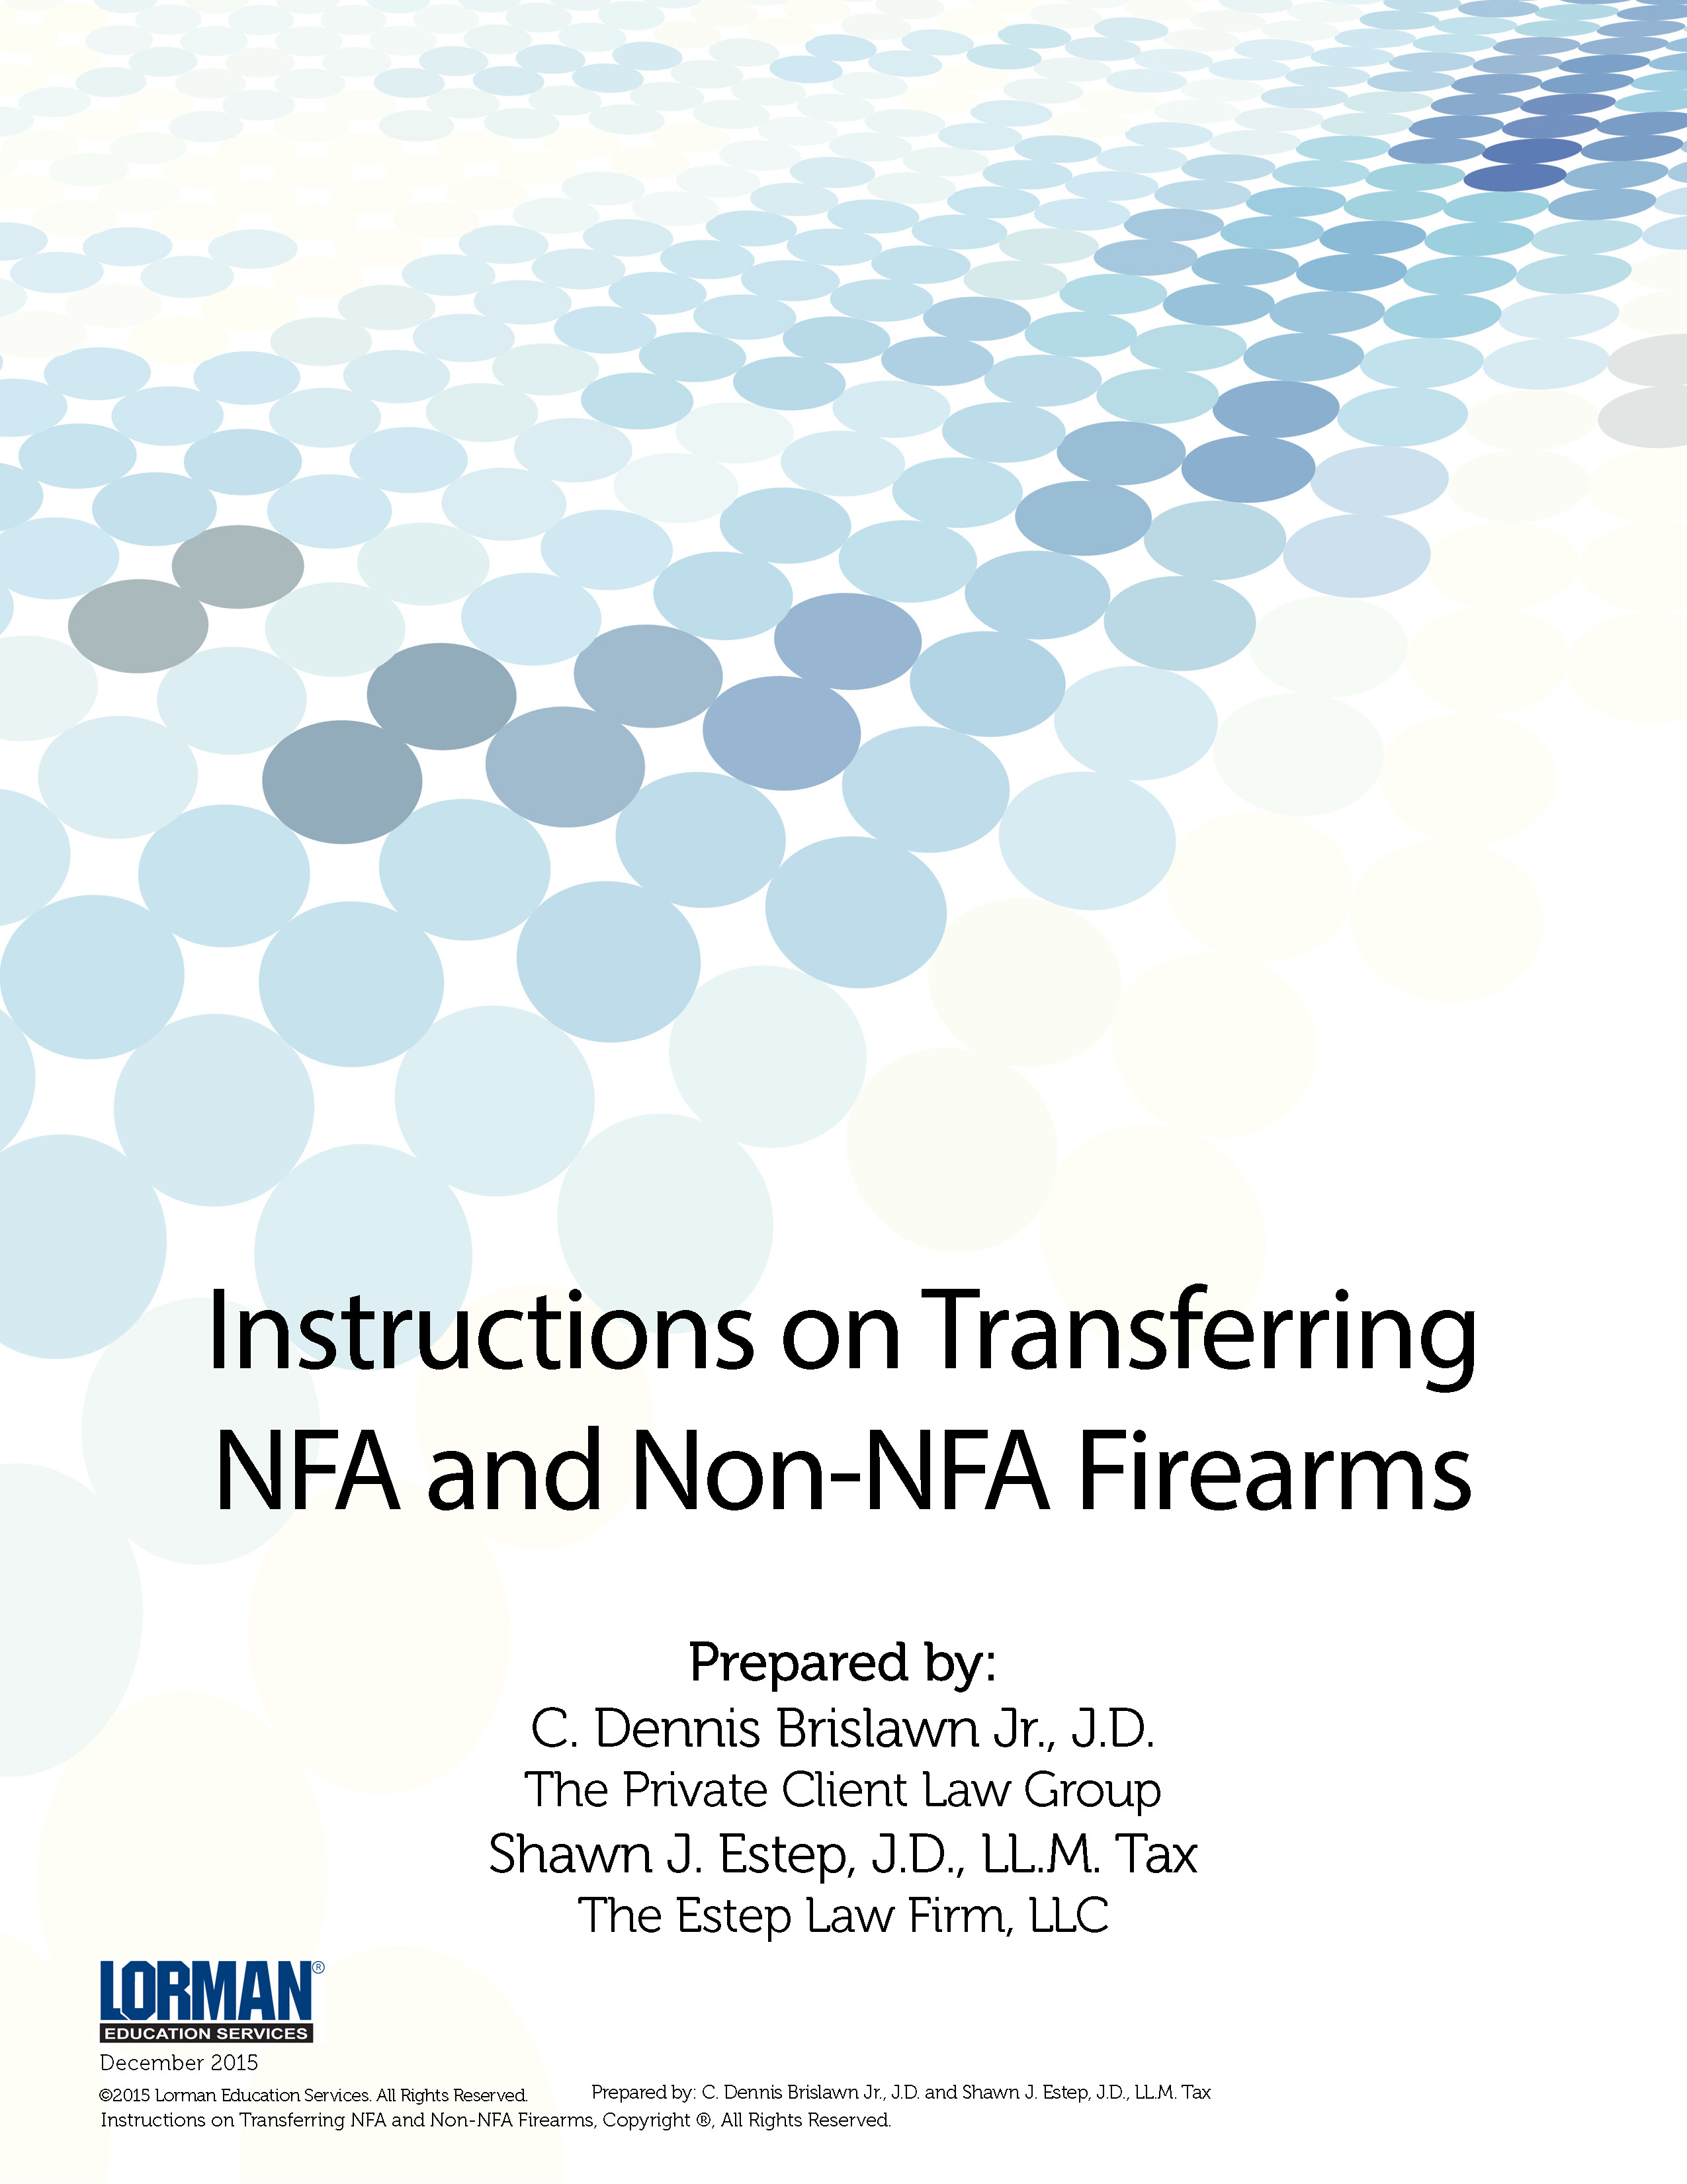 Instructions on Transferring NFA and Non-NFA Firearms